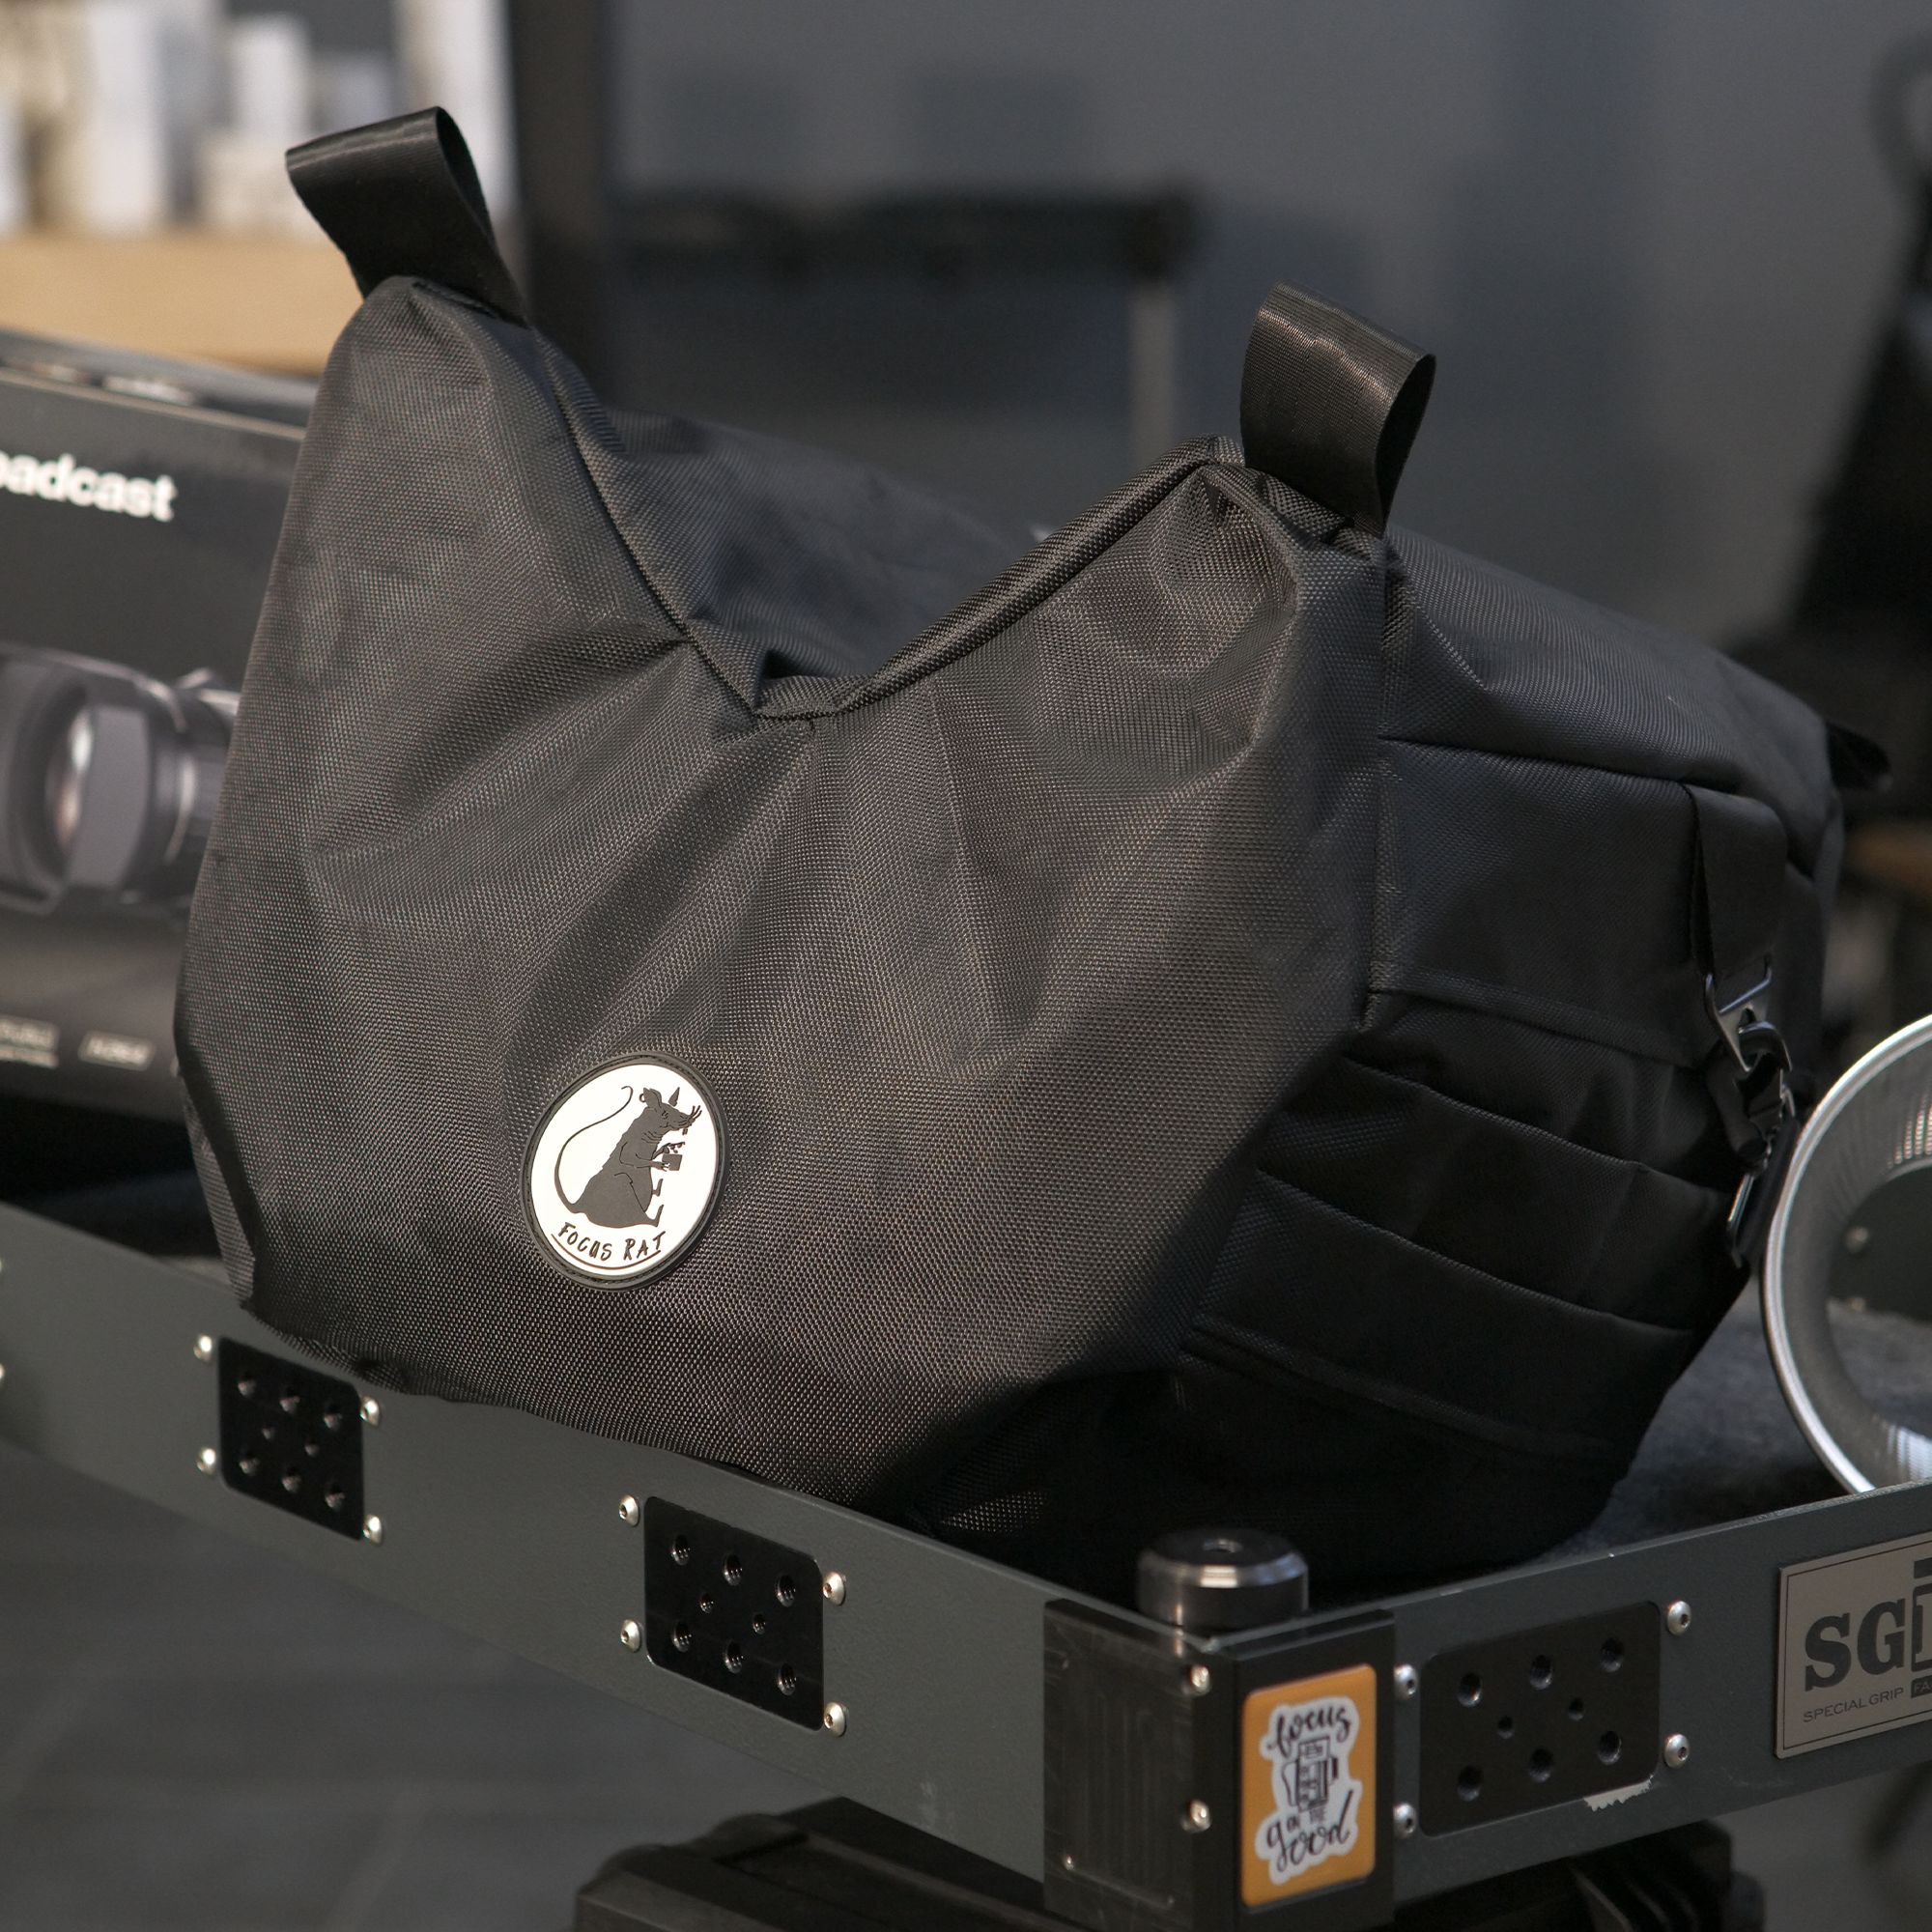 Cine Saddle like Steady Bag Large In Use on a tray